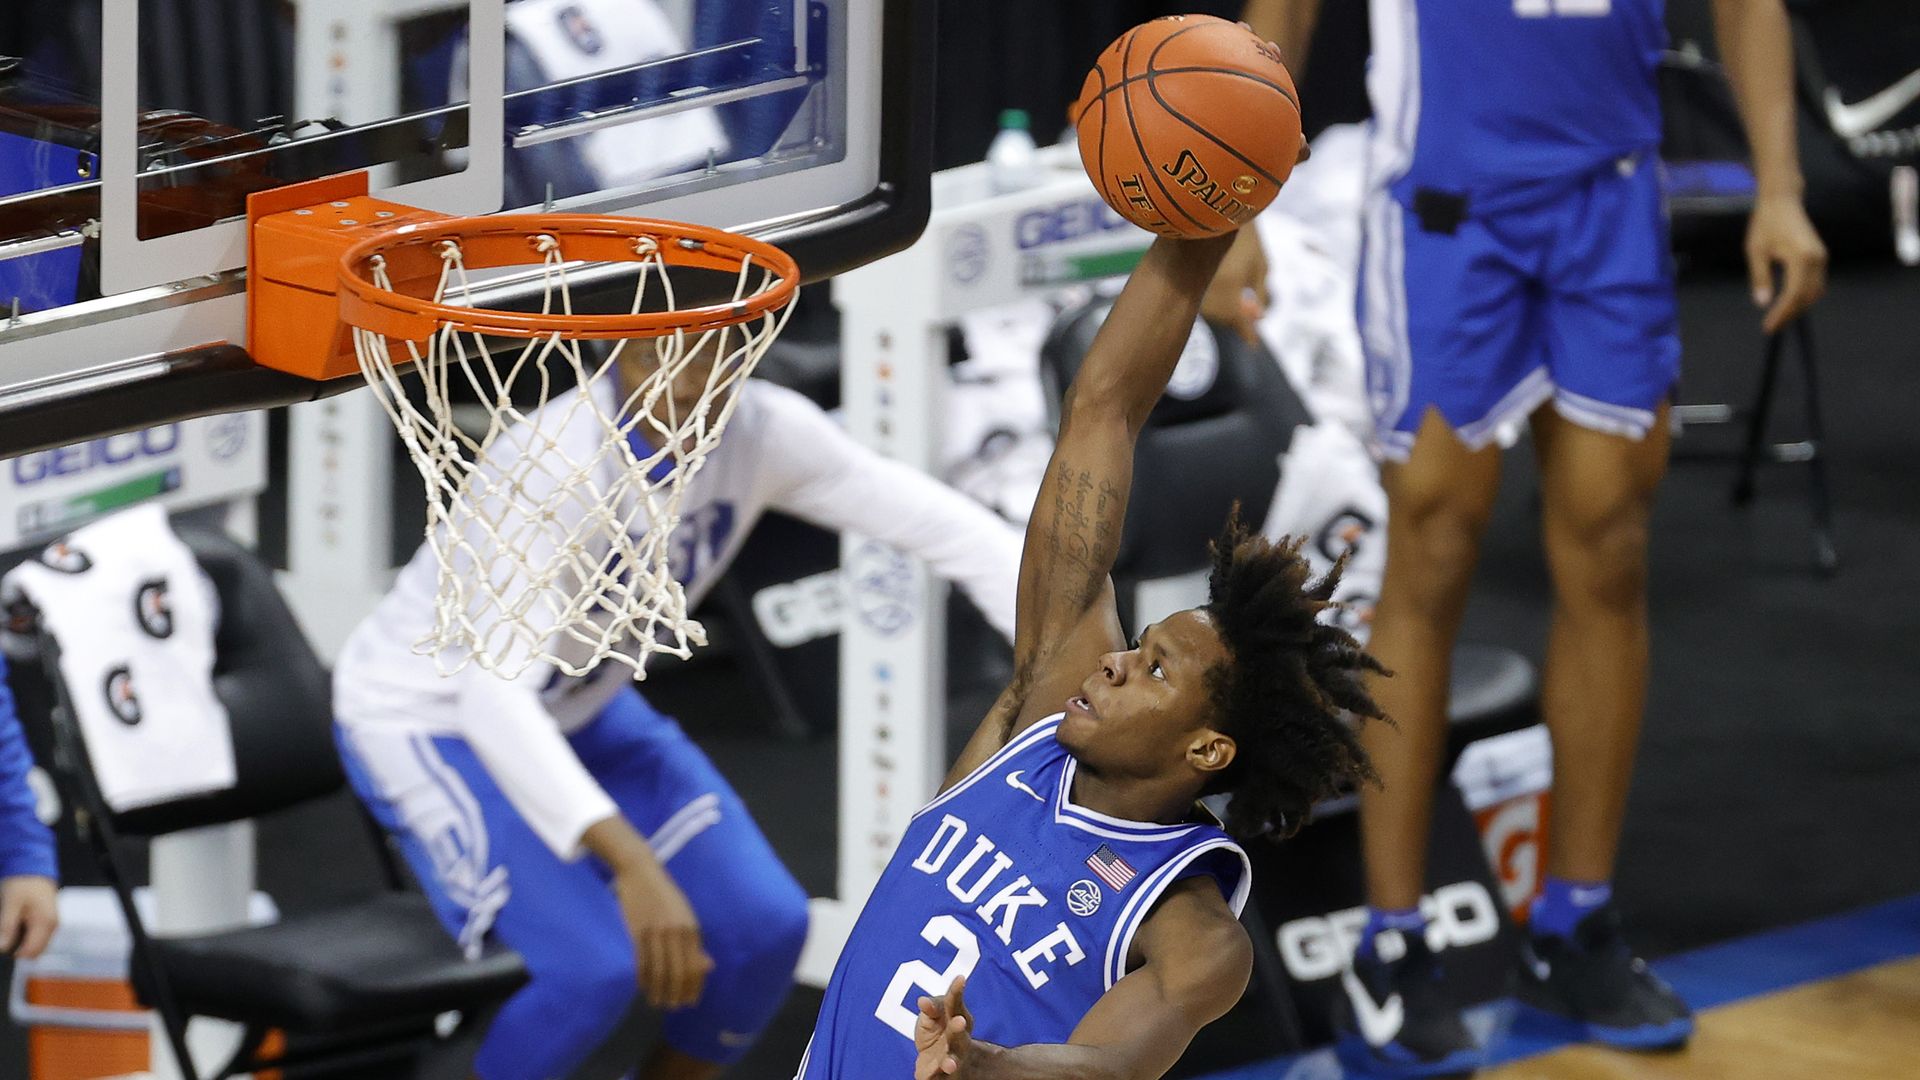 Duke player dunks the basketball through the hoop during a game